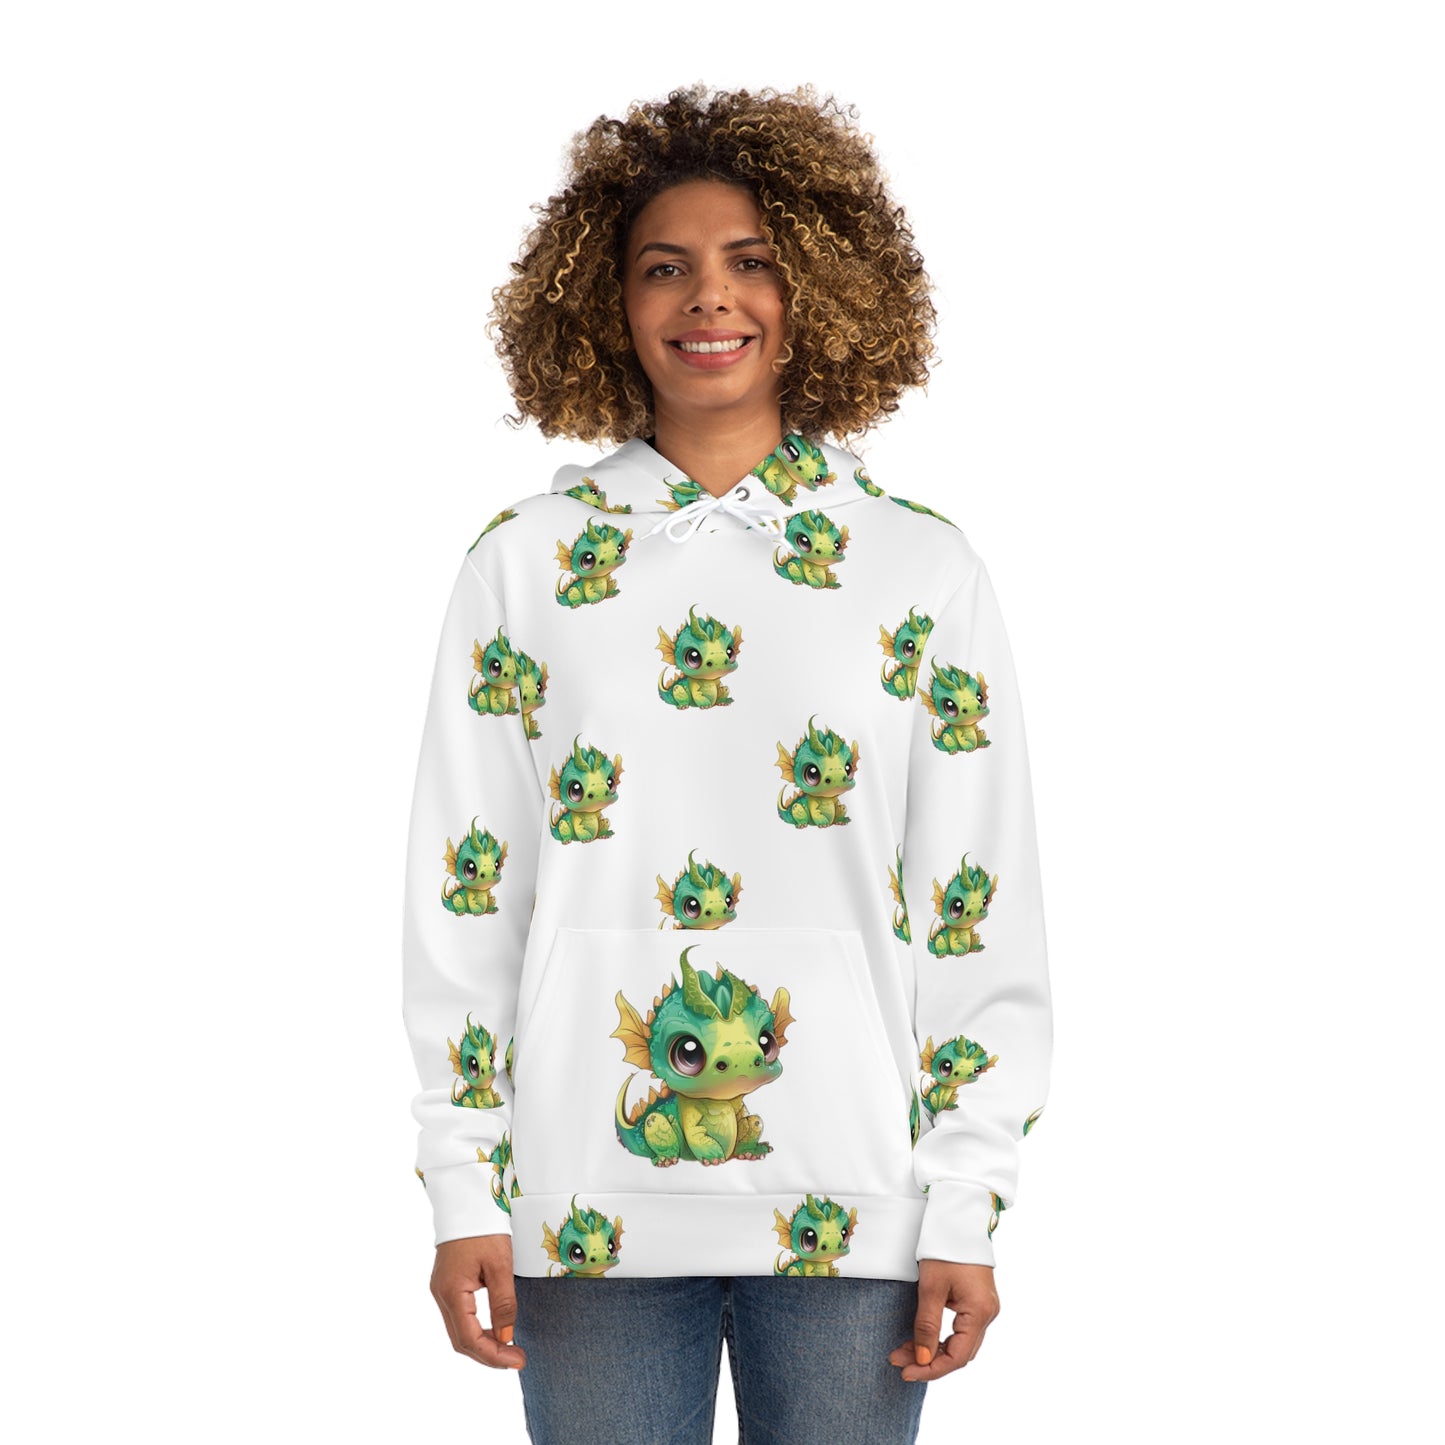 On a hoodie with a large front pocke sits a cute baby Bobby Dragon in greens yellows and a green baby horn - he is all over the hoody about 3 inches tall and 3 inches away from each other on this all over print hoody.